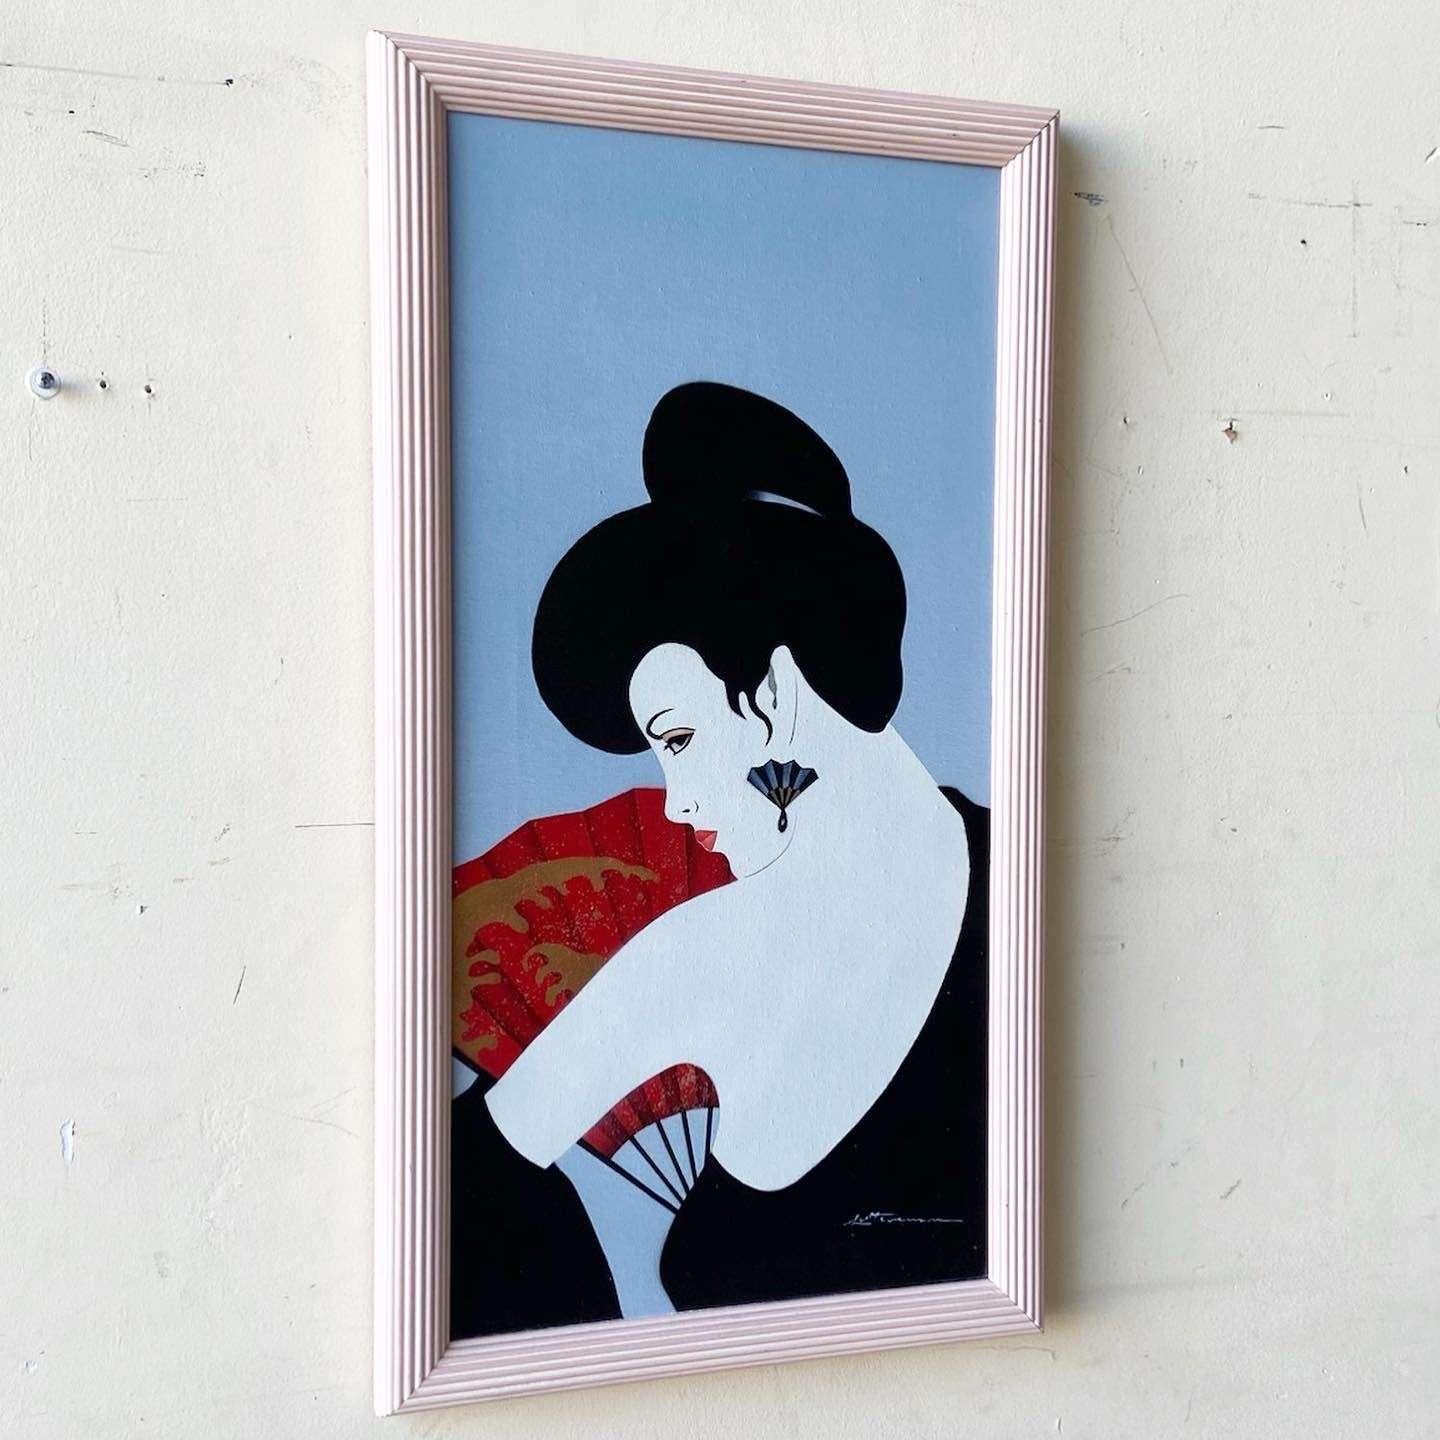 Incredible Patrick Nagel style vintage postmodern/chinoiserie oil painting. Displayed in a pink frame, subject is a woman with black hair in a black dress holding a red fan.